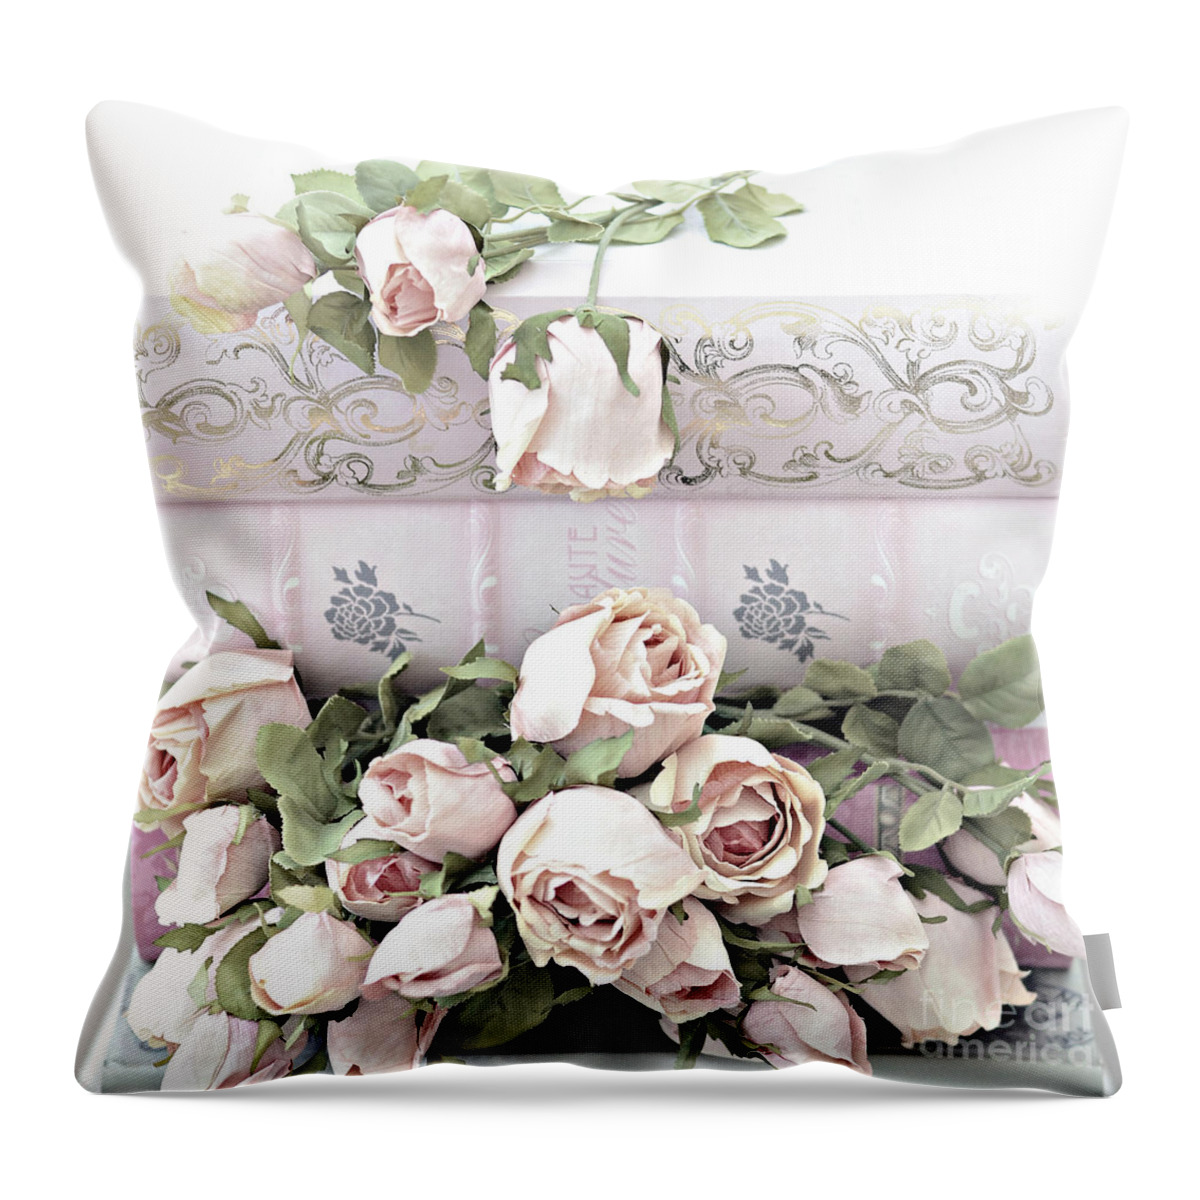 Pink Roses Photography Throw Pillow featuring the photograph Pink Shabby Chic Roses On Pink Cottage Books - Shabby Cottage Pink Roses Home Decor by Kathy Fornal